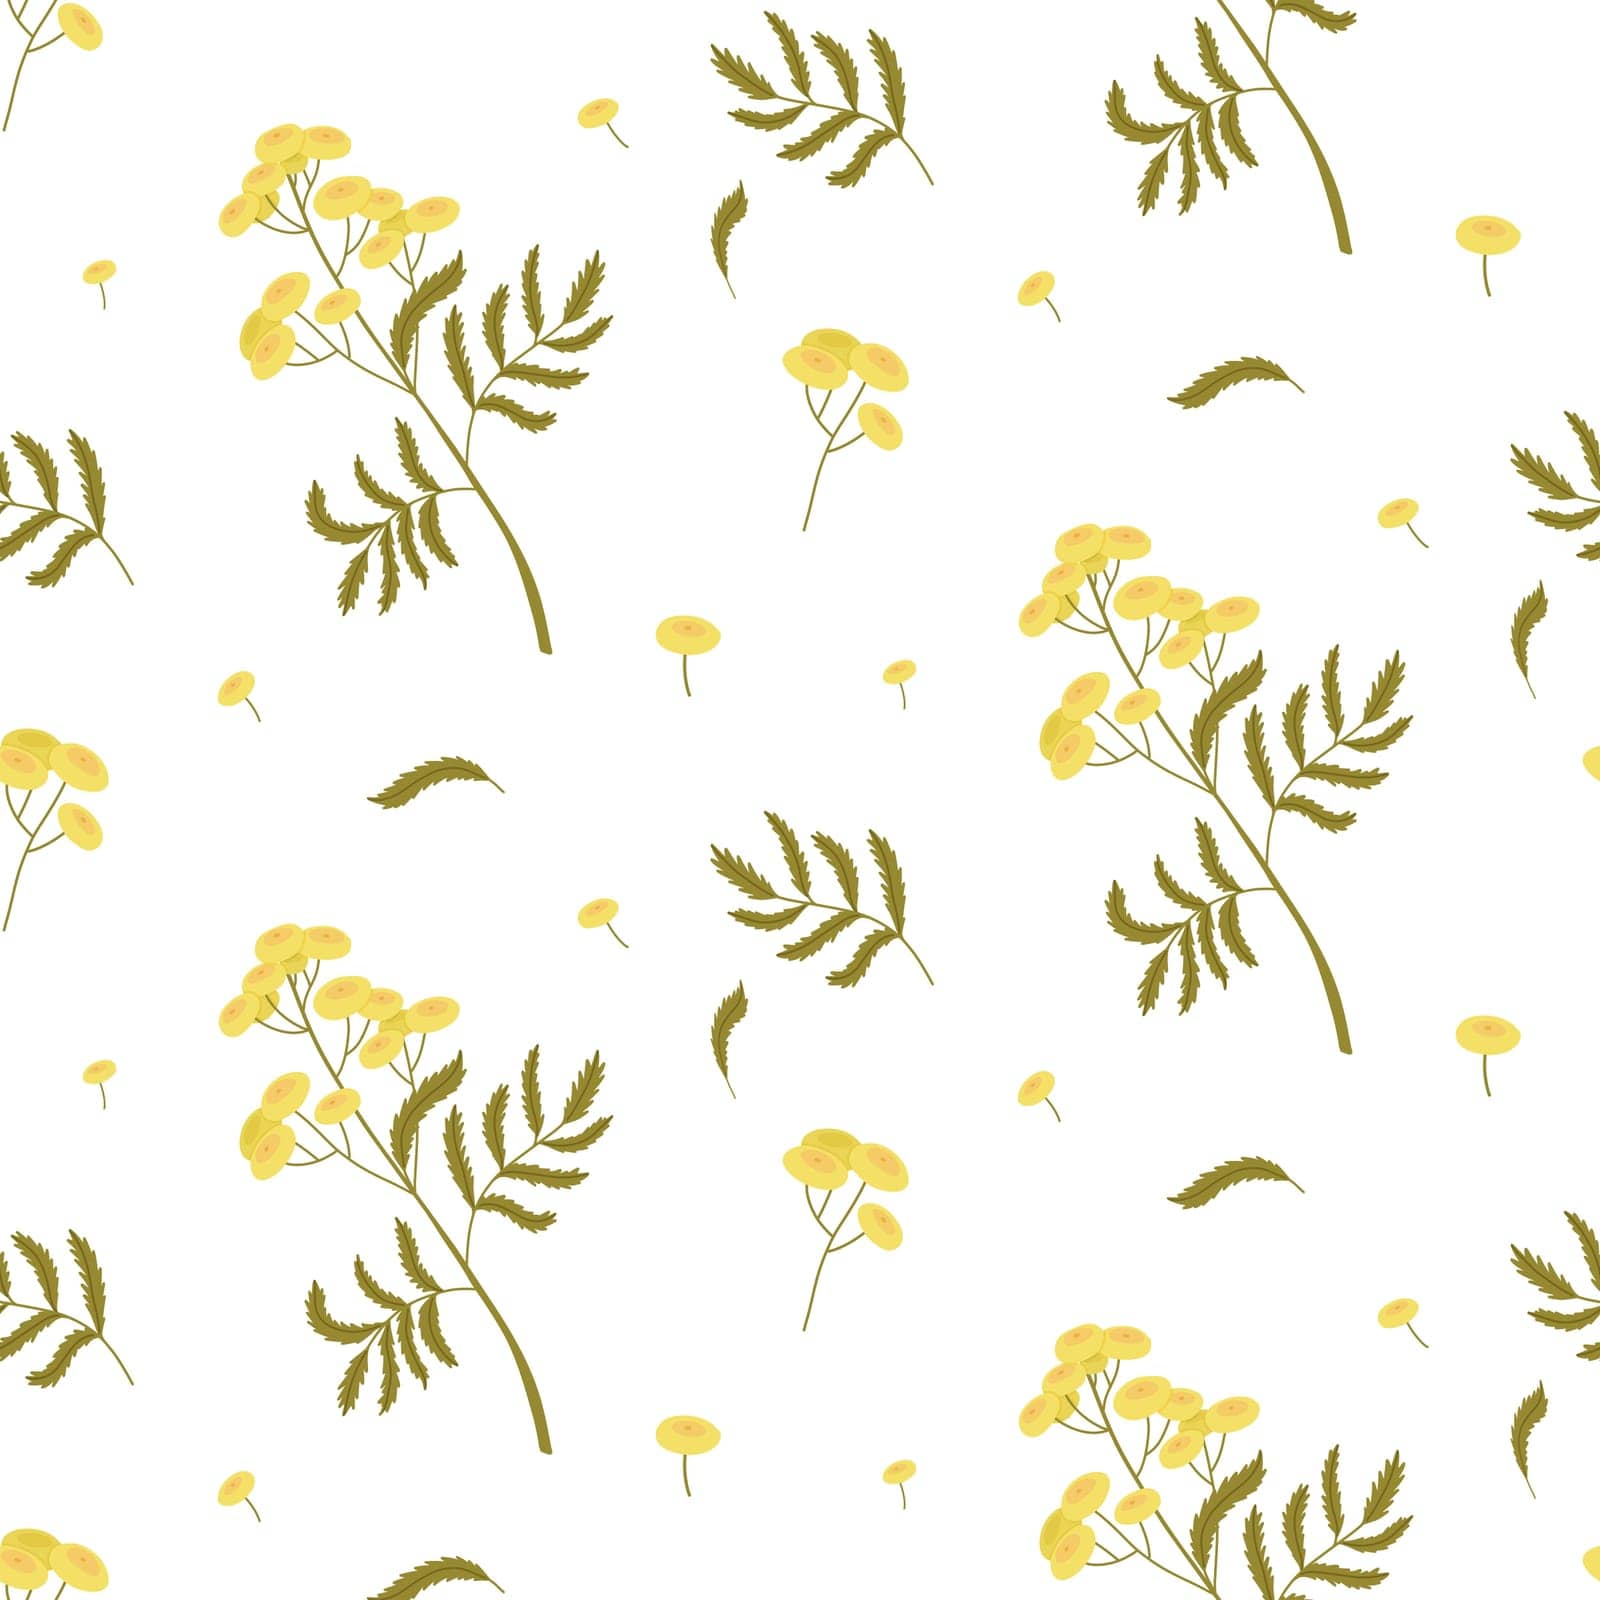 Light seamless pattern with twigs and flowers of tansy on a white background. Vector illustration